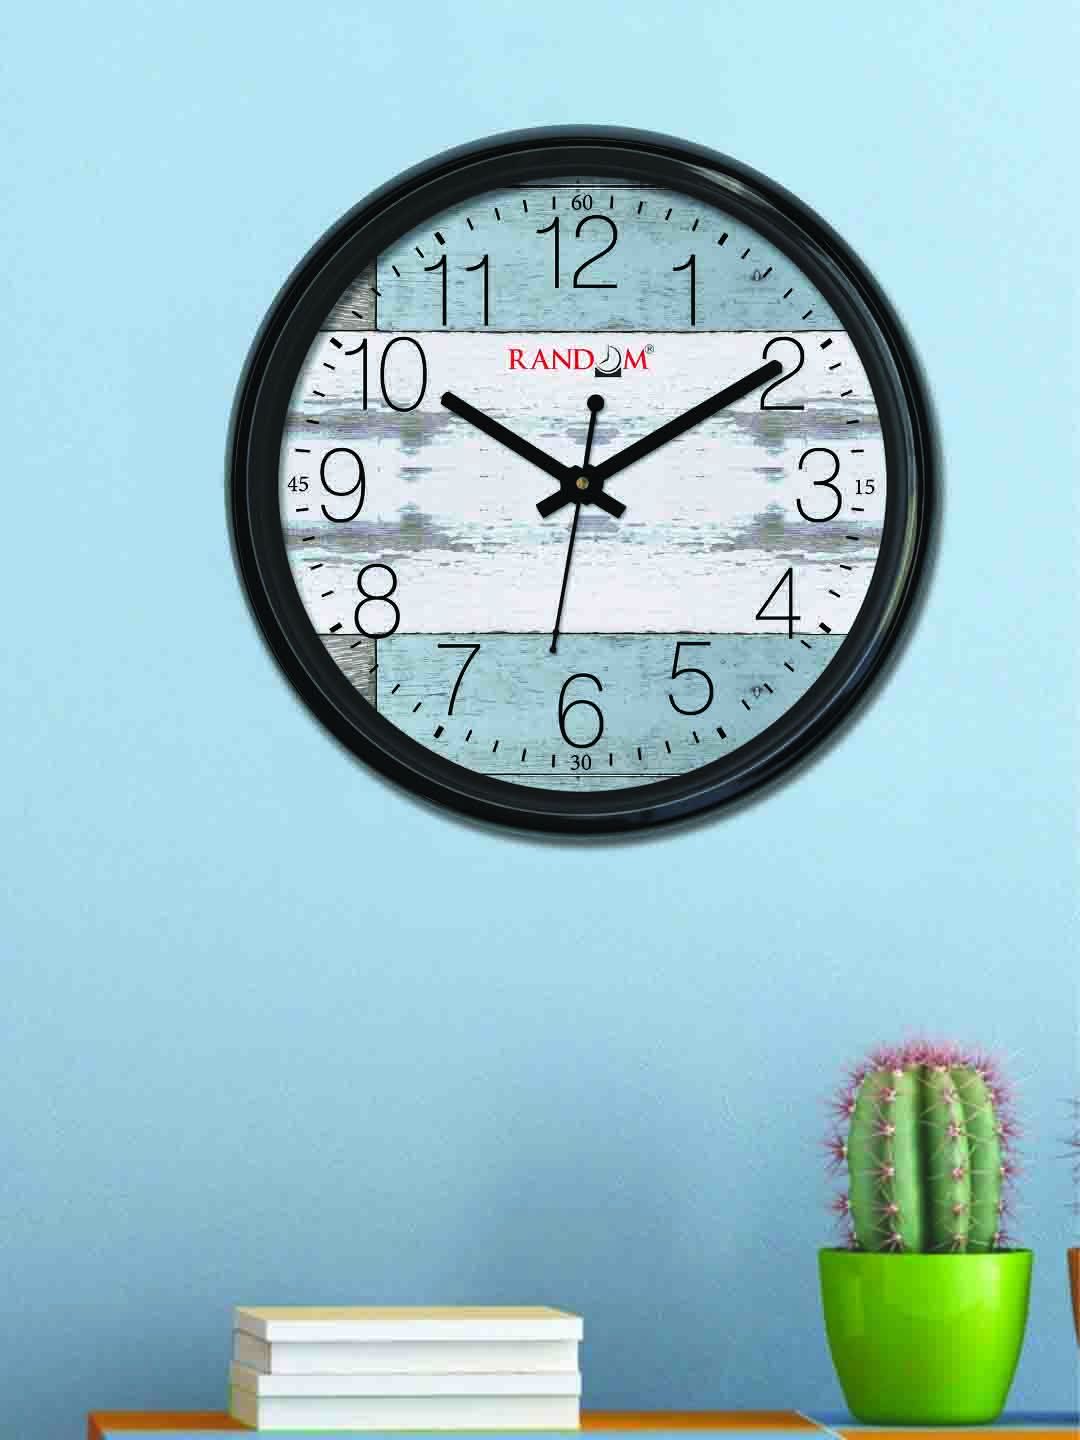 RANDOM Off-White & Blue Round Printed Analogue Wall Clock Price in India